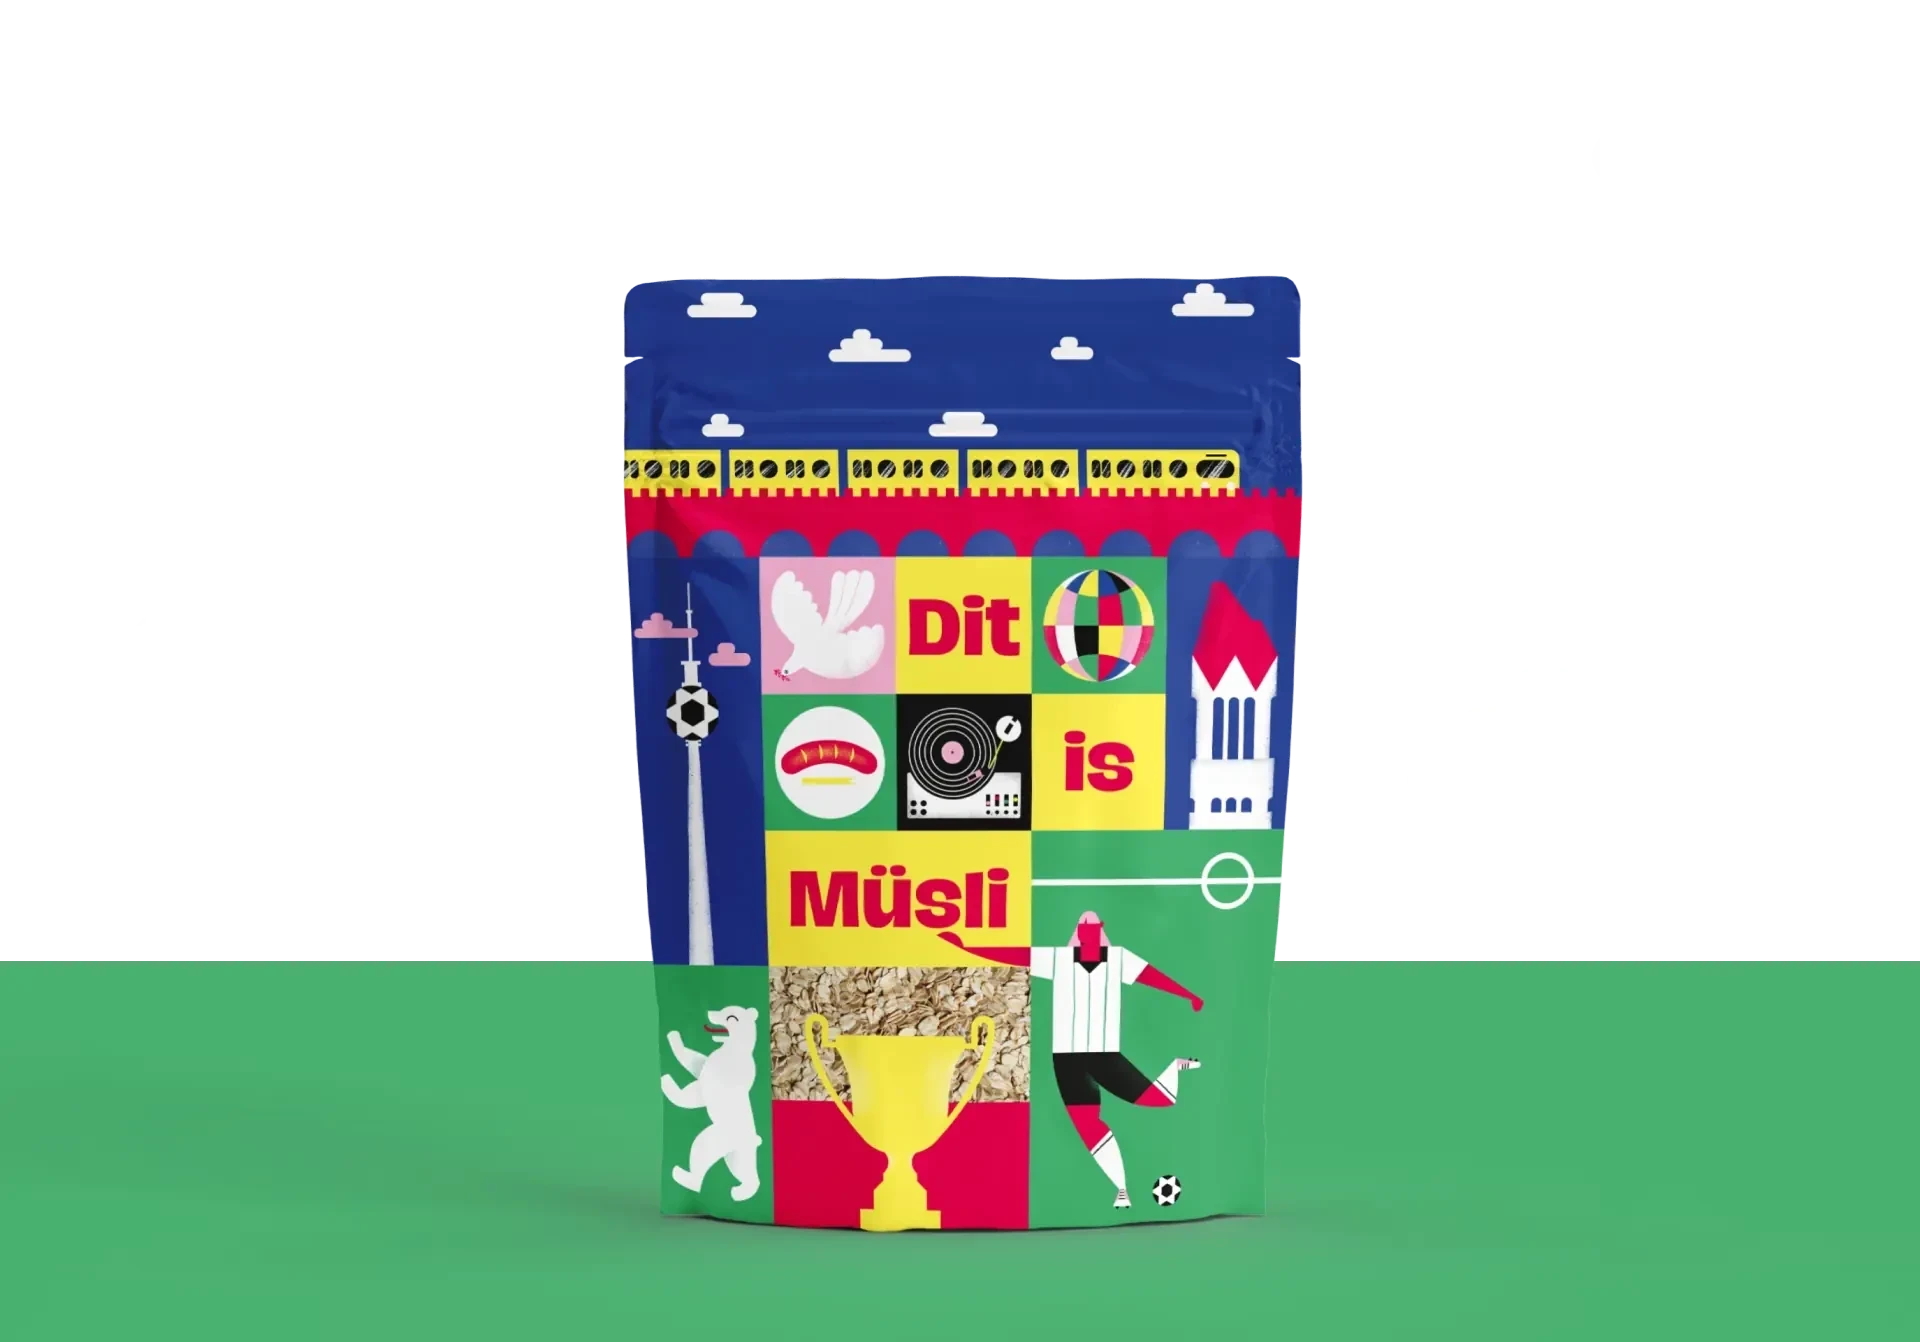 The packaging of “Dit is Müsli” features vibrant Berlin illustrations in squares and rectangles in primary colors like red, blue, yellow, and green.